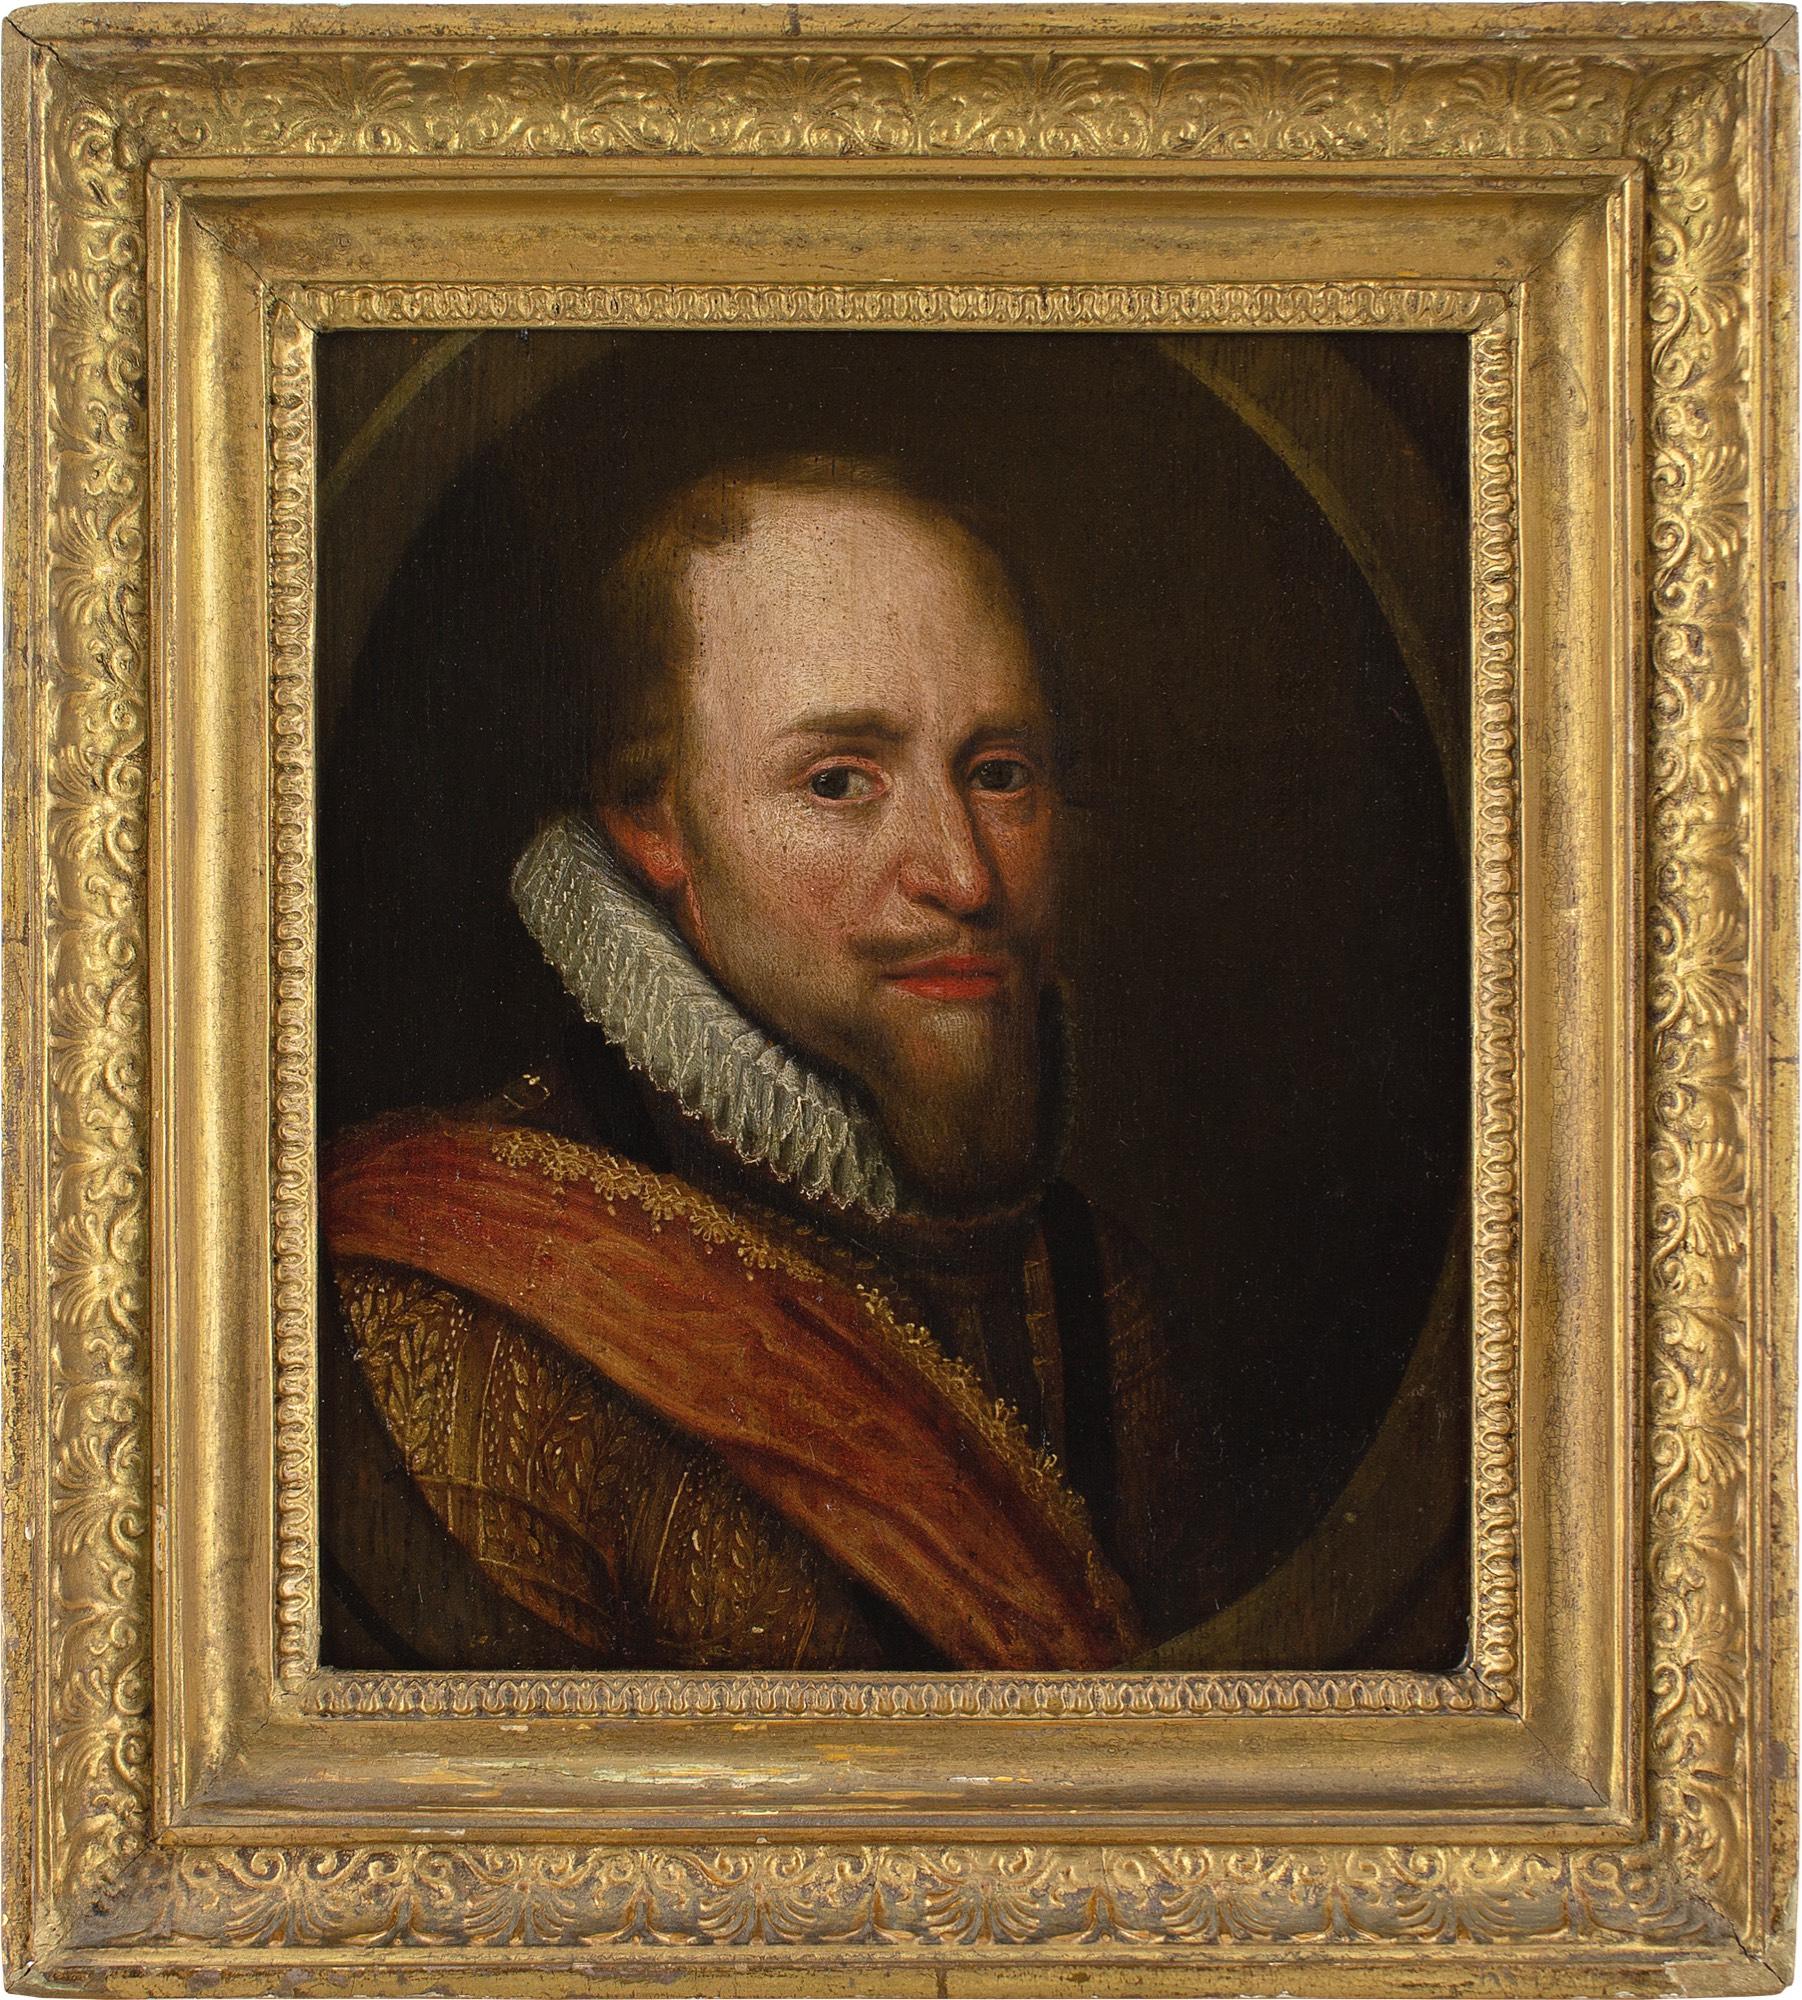 This early to mid-17th-century oil on panel depicts Maurice of Nassau (1567-1625), Prince of Orange. It’s a bust-length portrait, presented in a feigned oval, after a full length by Dutch artist Michiel Jansz. van Mierevelt (1567-1641).

Maurice of